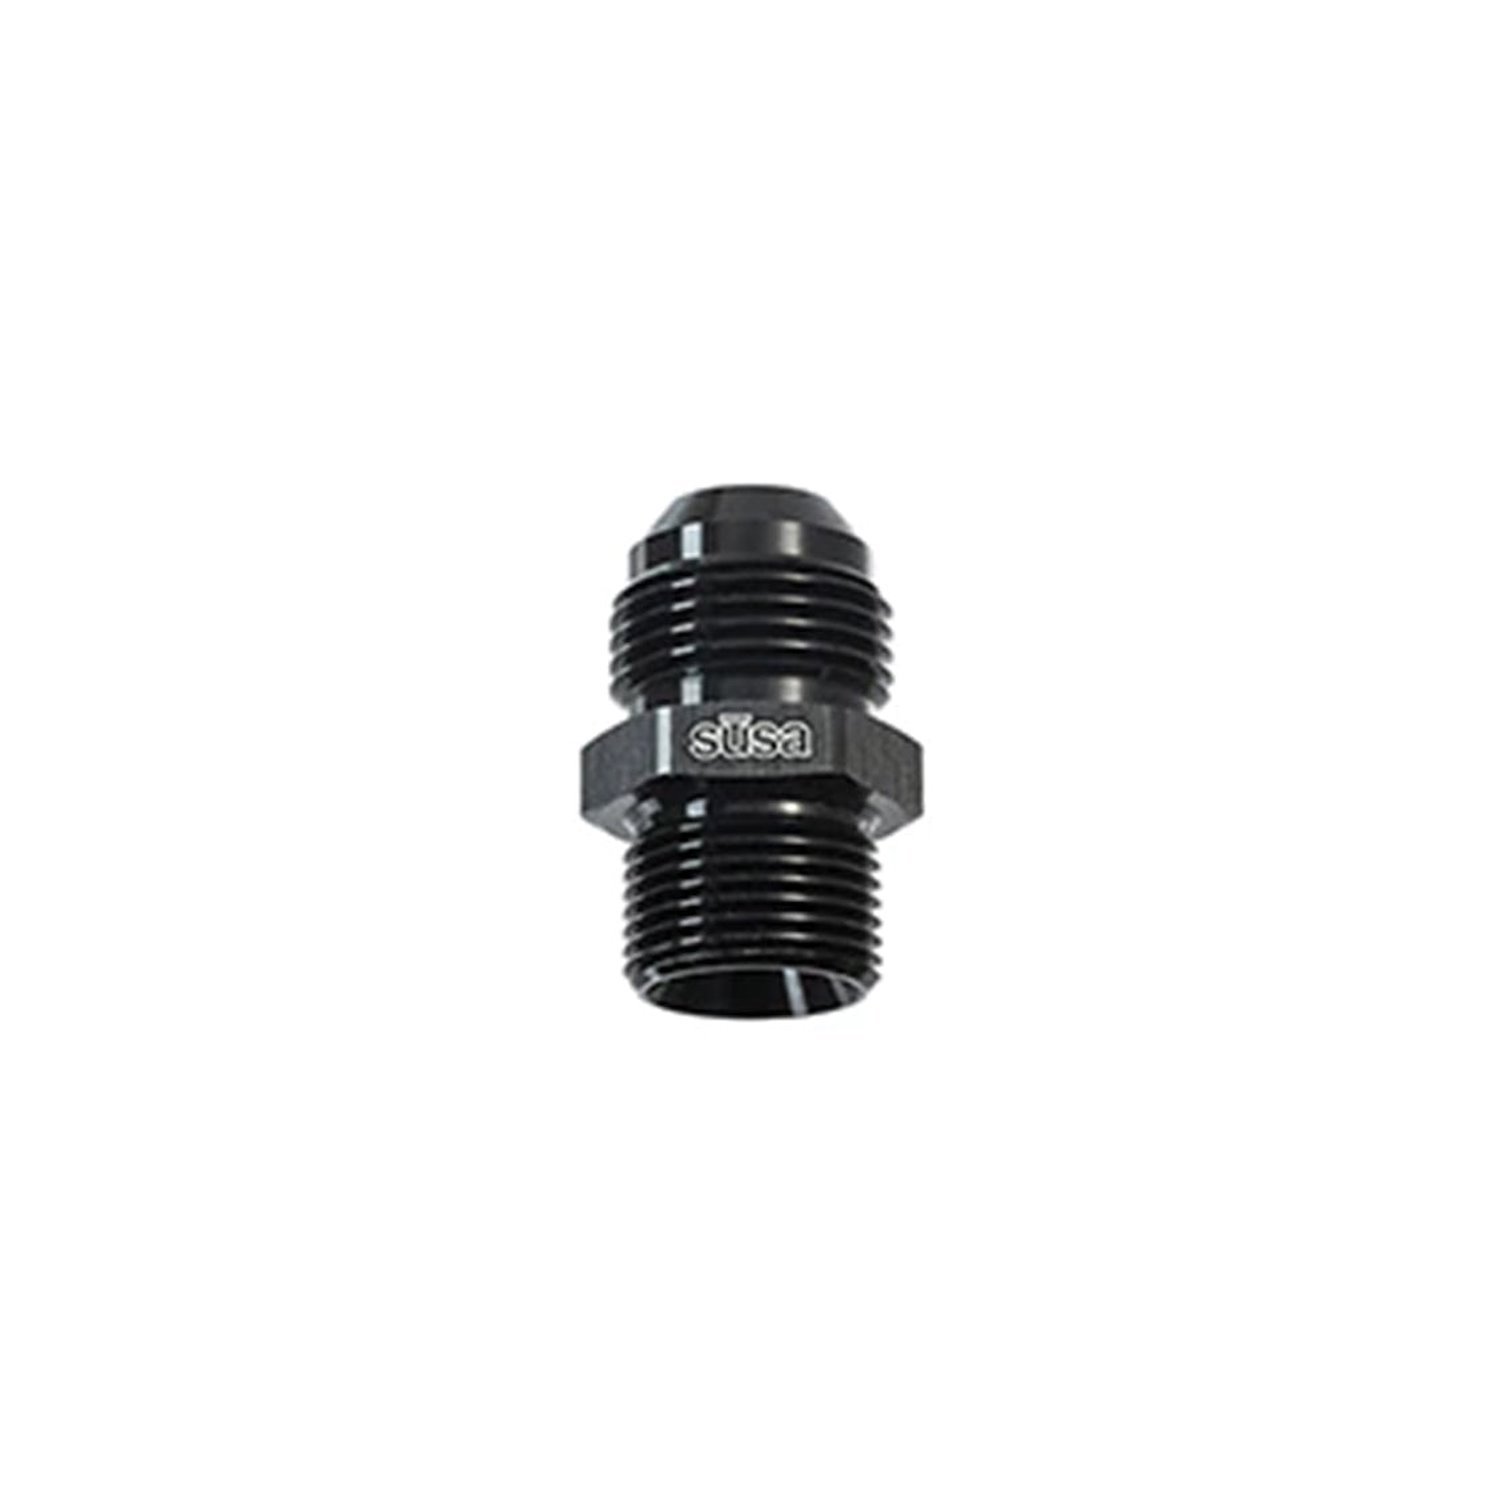 22-M18AN06-00 Adapter Fitting, M18 Male to AN06 Male, Straight